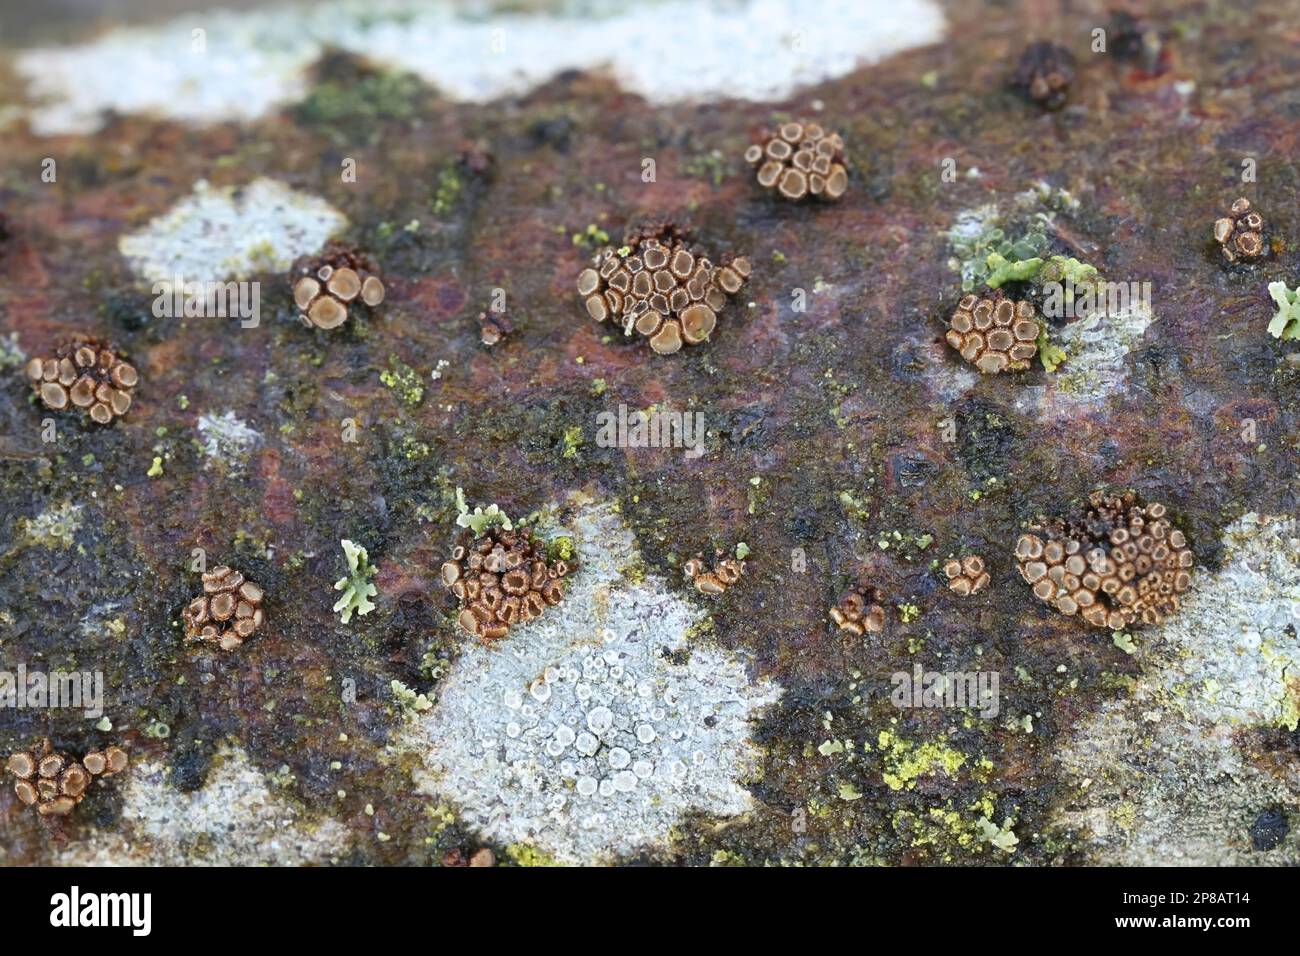 Merismodes fasciculata, known as crowded cuplet, wild fungus from Finland Stock Photo